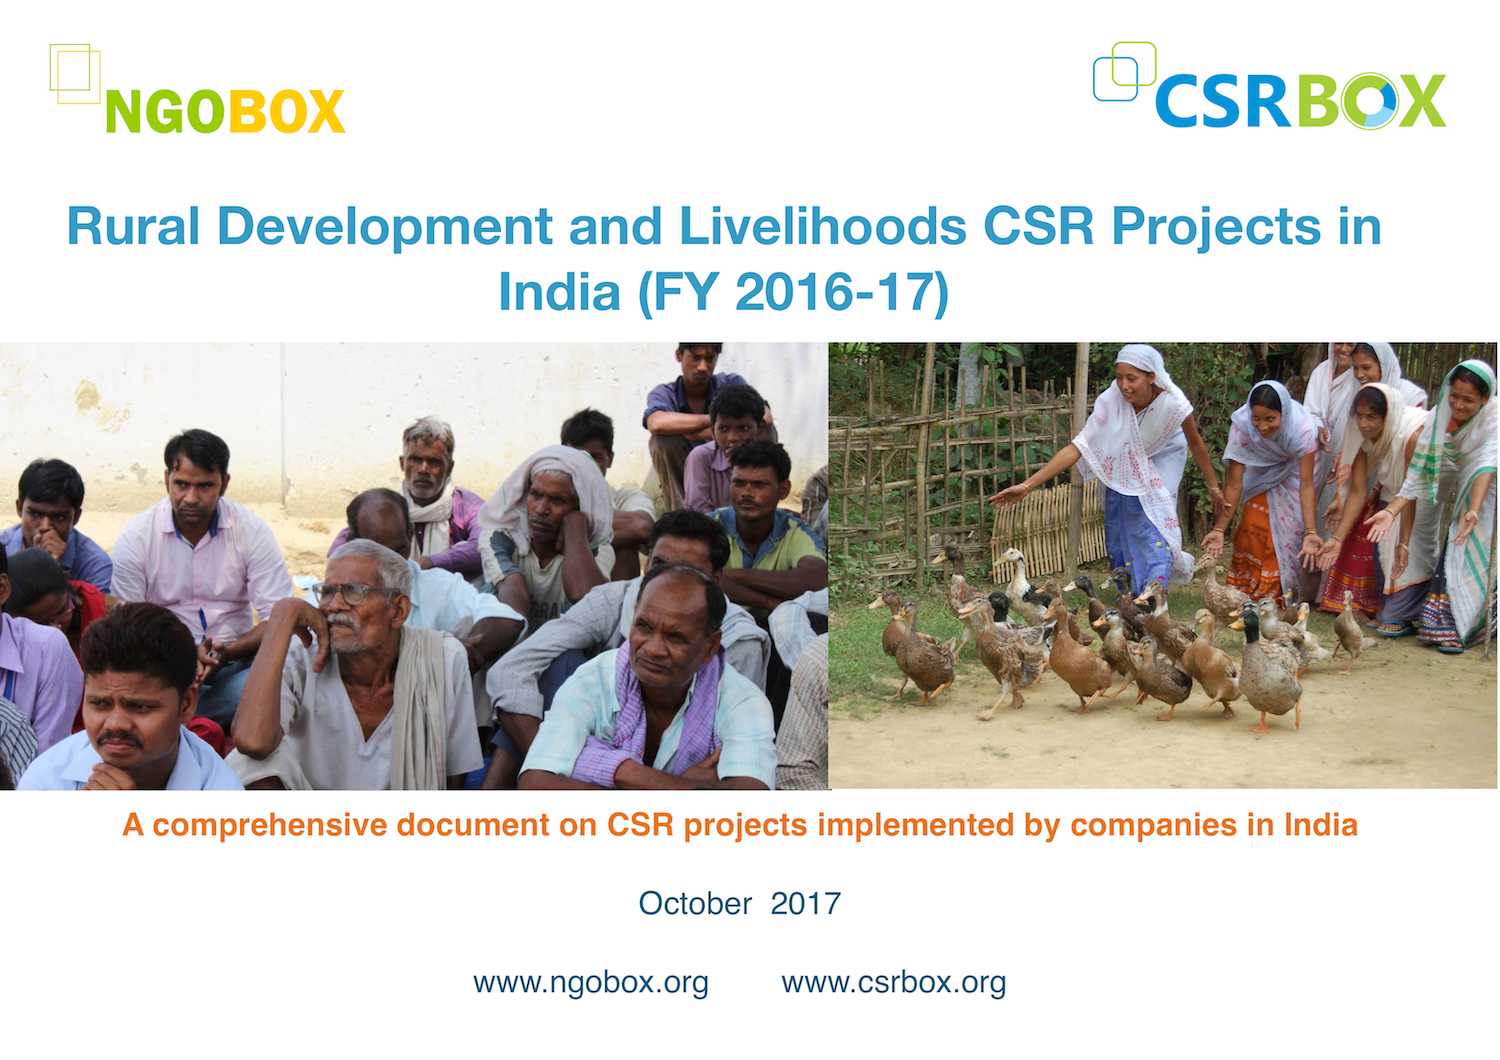 Rural Development and Livelihoods CSR Projects in India (FY 2016-17)